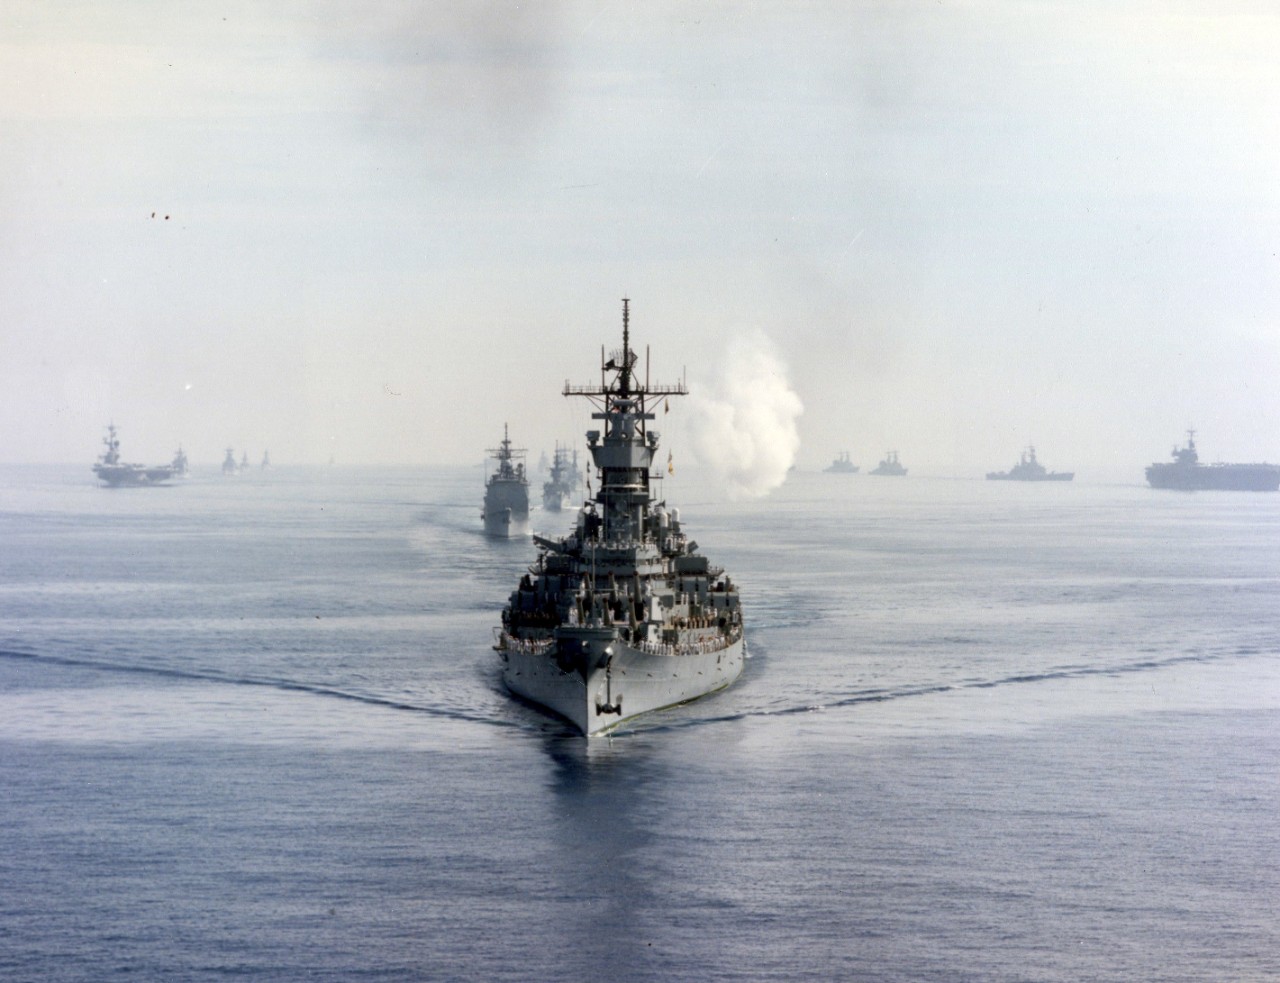 300-CFD- DN-SC-90-11752:  USS Iowa (BB 61), 1987.   USS Iowa leads it battle group into Augusta Bay, Sicily.  The aircraft carrier USS Coral Sea (CV 43) and its battle group are at left.  The aircraft carrier USS Saratoga (CV 60) and its battle group are at right.   Photographed by PH3 Michael Skeens, 17 October 1987.  NHHC Photograph Collection, Navy Subject Files, Ships.